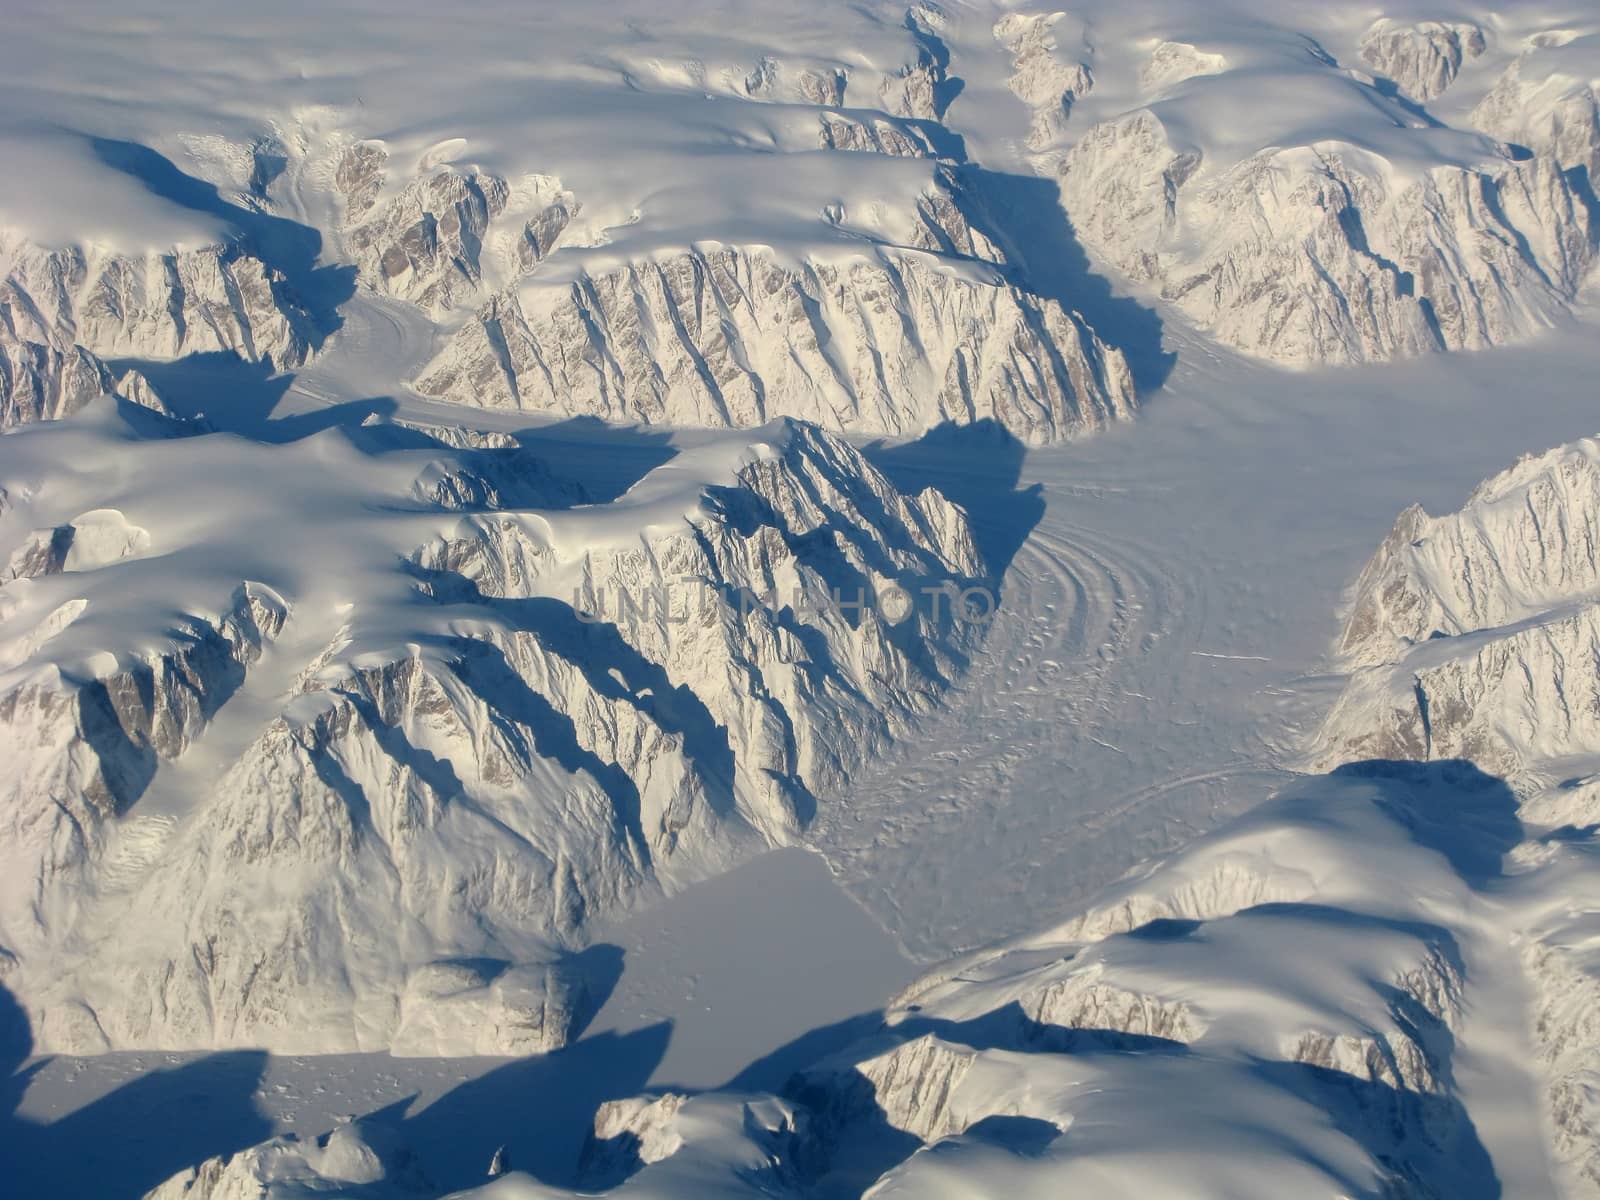 Aerial view of the Greenland with glacier, mountains and rocks